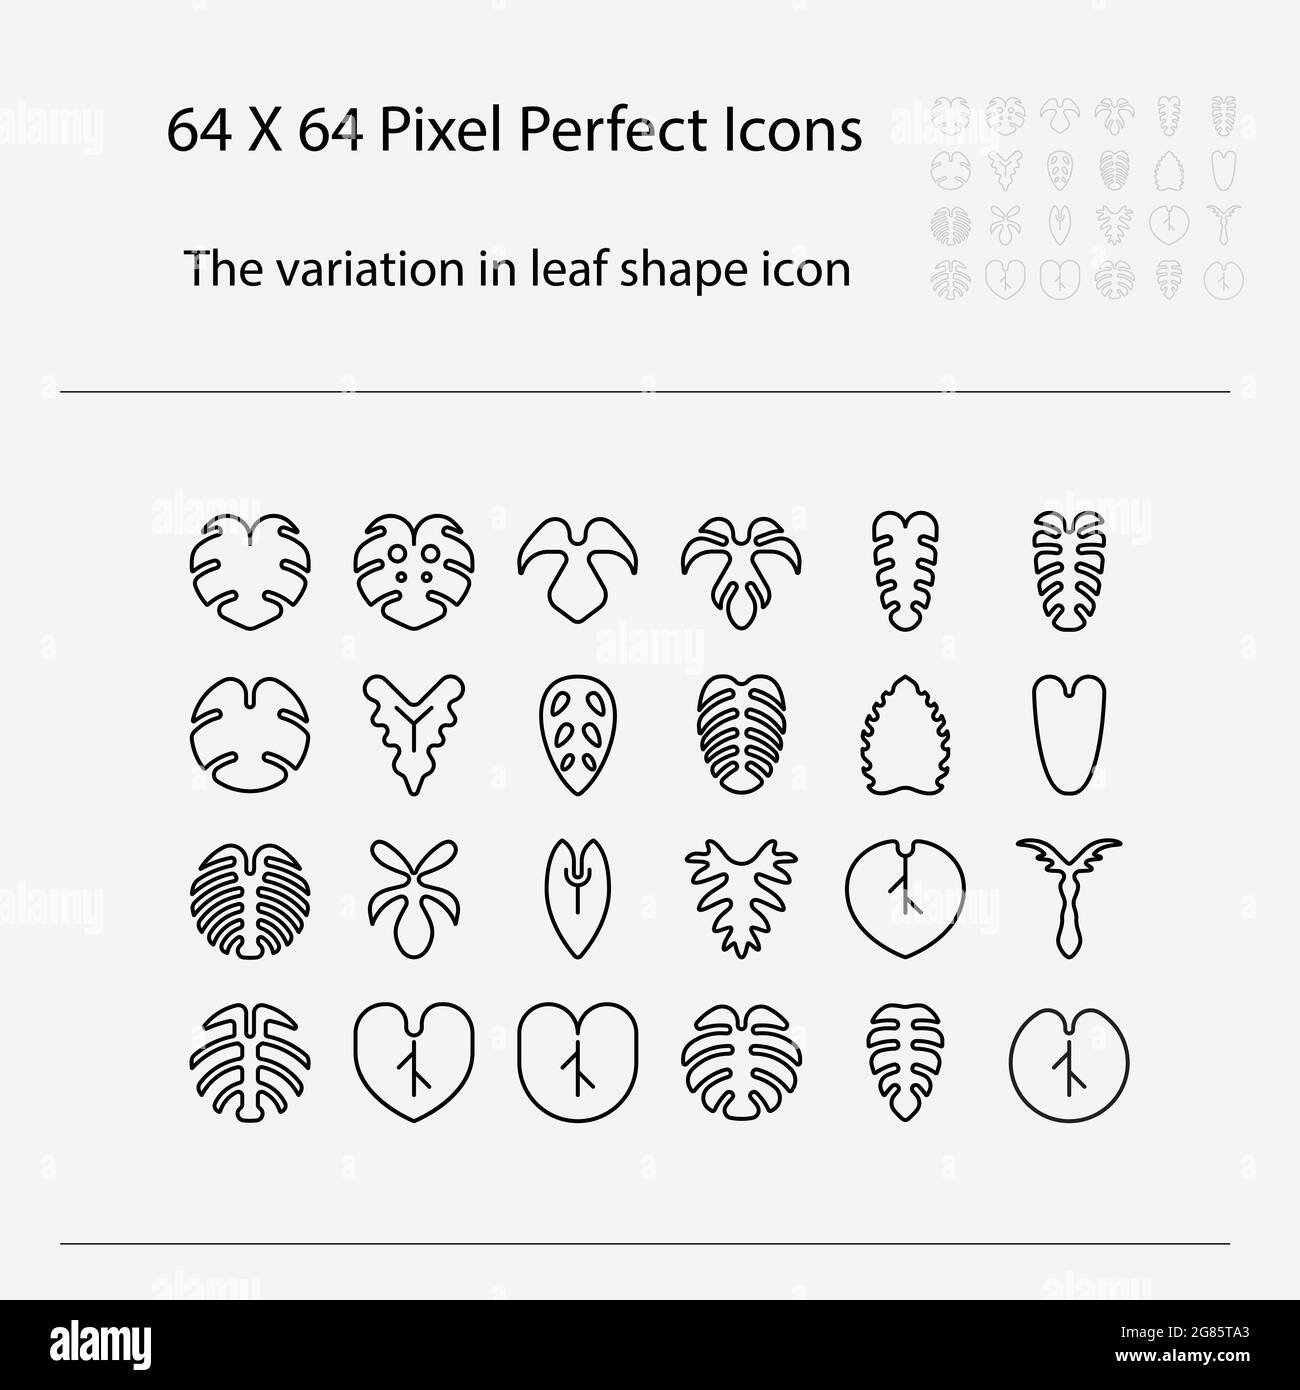 The variation of leaf shape icon. Variation of leaves vector outline icon Stock Vector